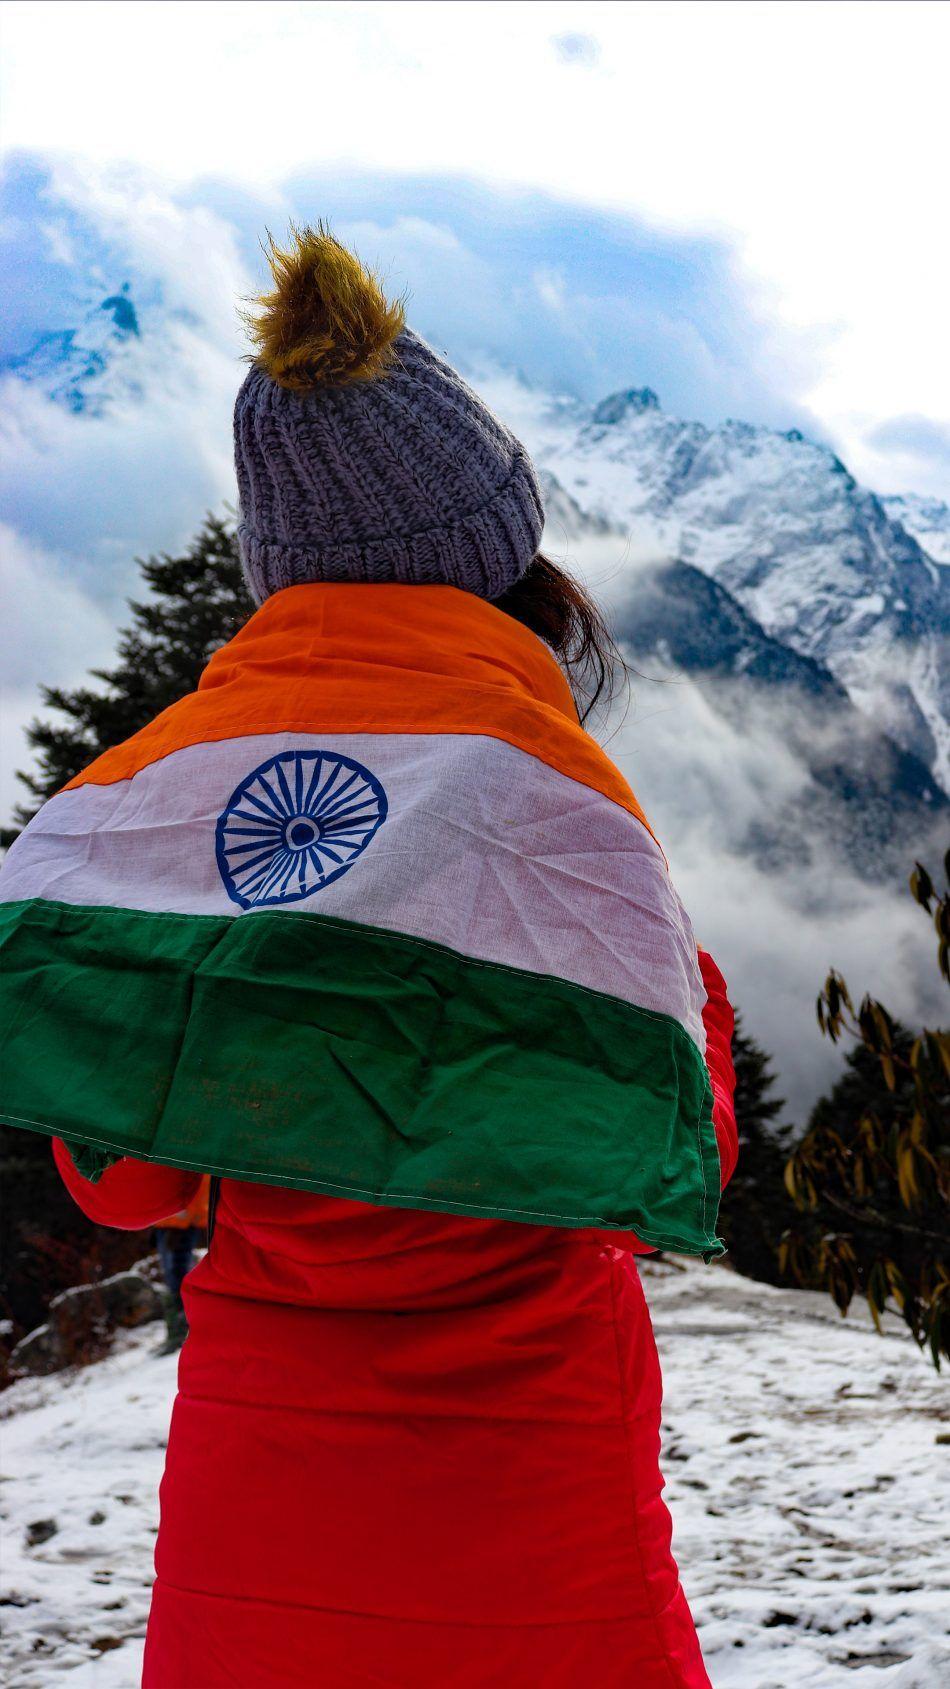 Girl Indian Flag Snow Mountains. Indian flag wallpaper, Indian